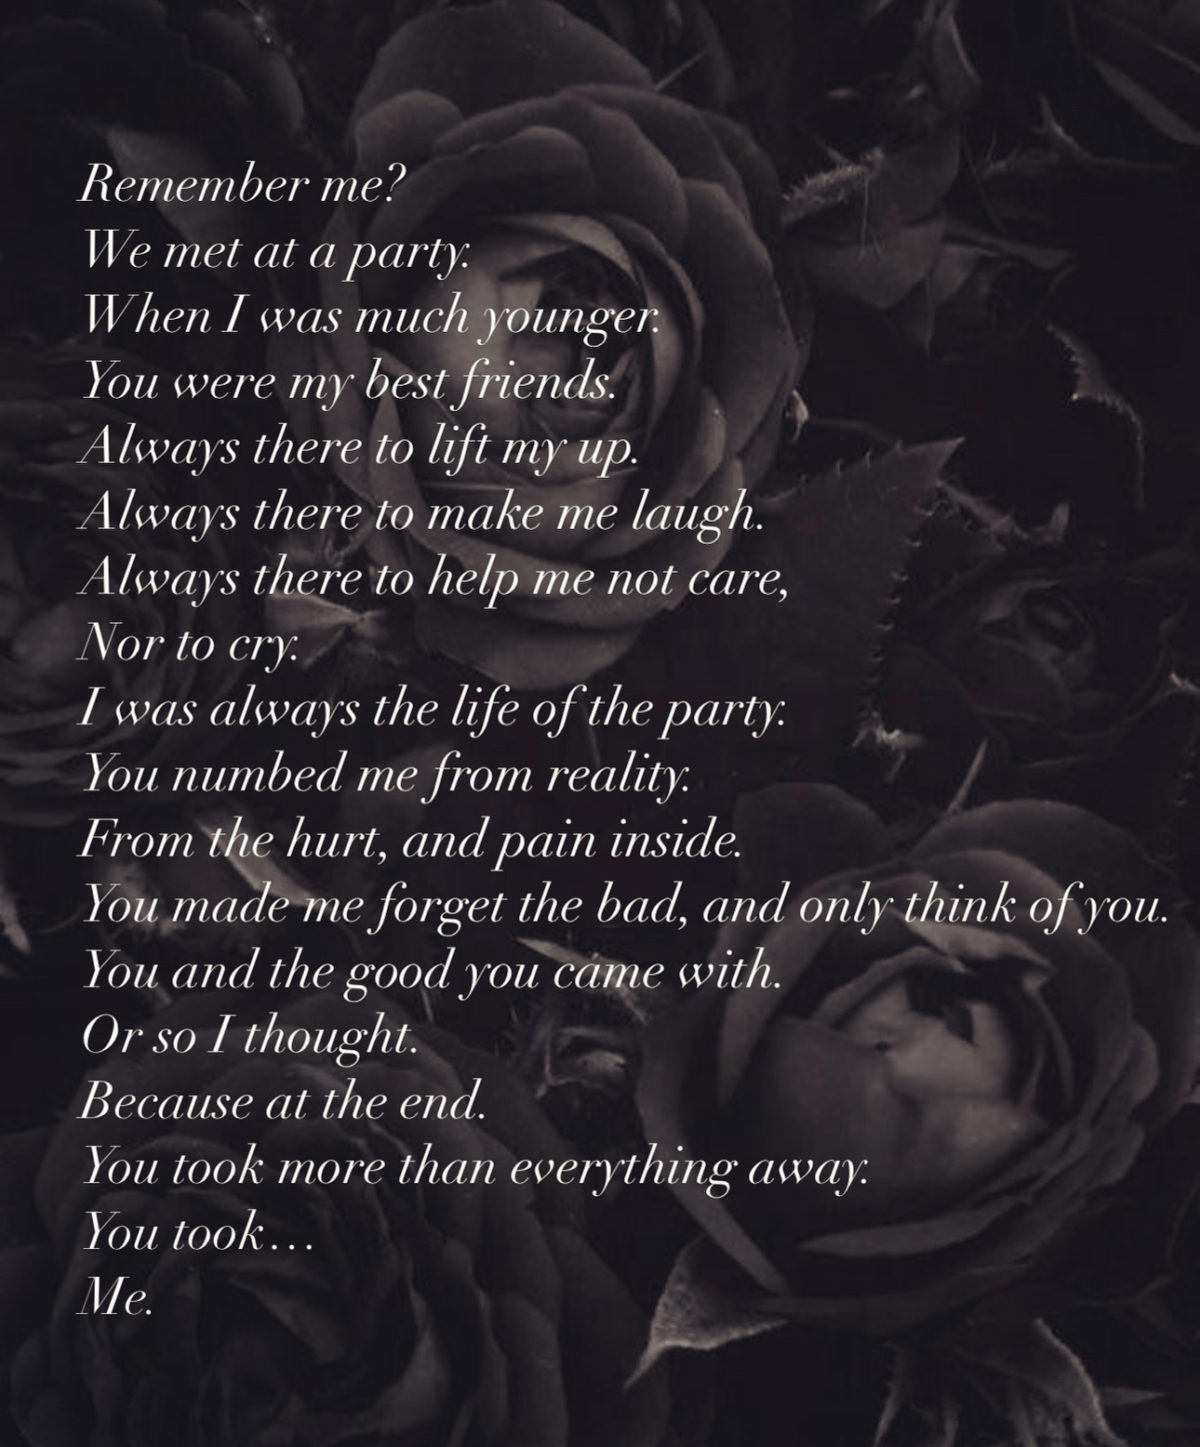 This image portrays Remember me? by Addiction Poetry.